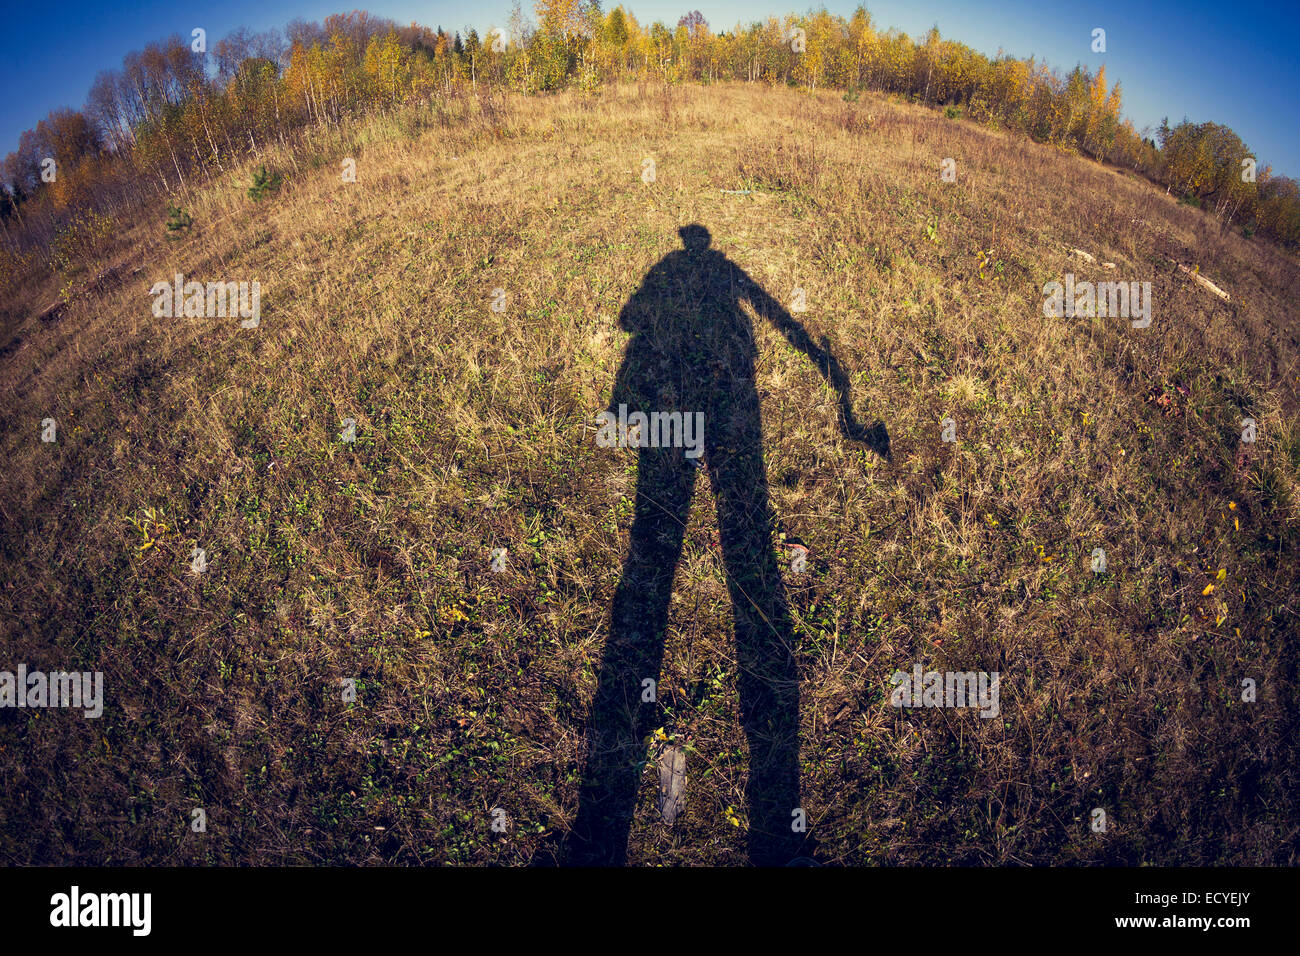 Fish-eye lens view of shadow of man in field Stock Photo